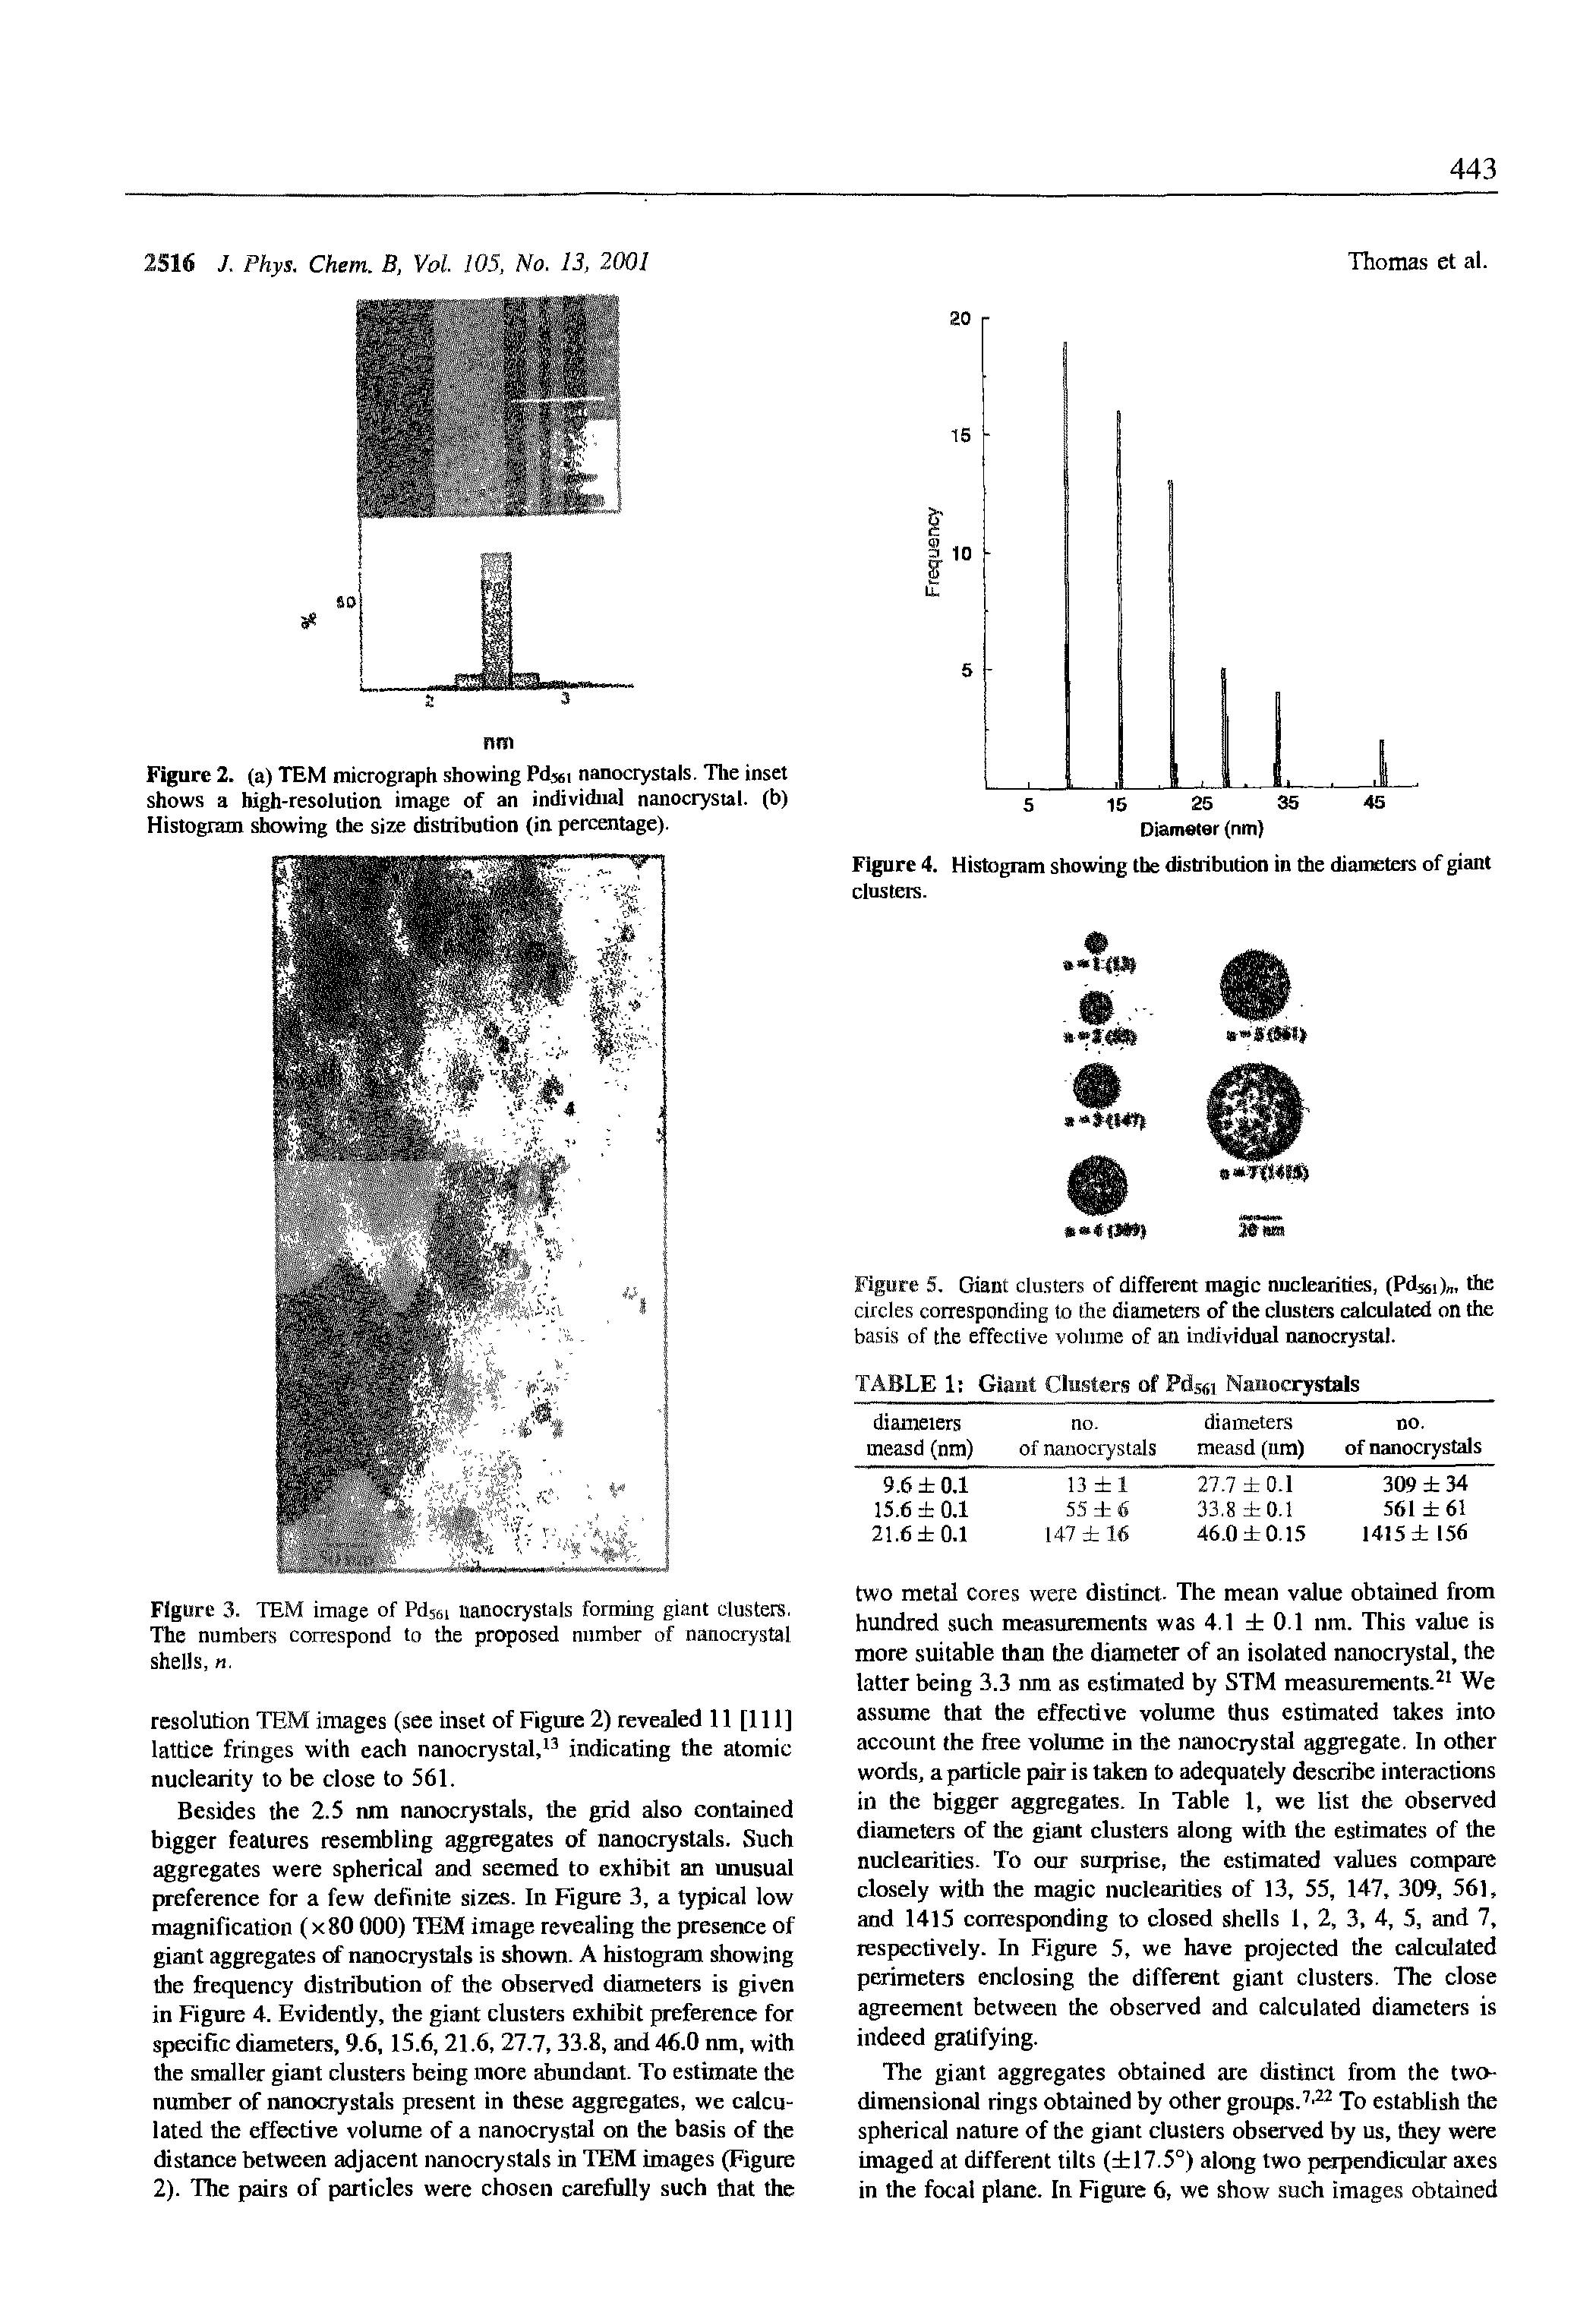 Figure 5. Giant clusters of different magic nuclearities, (Pd the circles corresponding to the diameters of the clusters calculated on the basis of the effective volume of an individual nanocrystal.